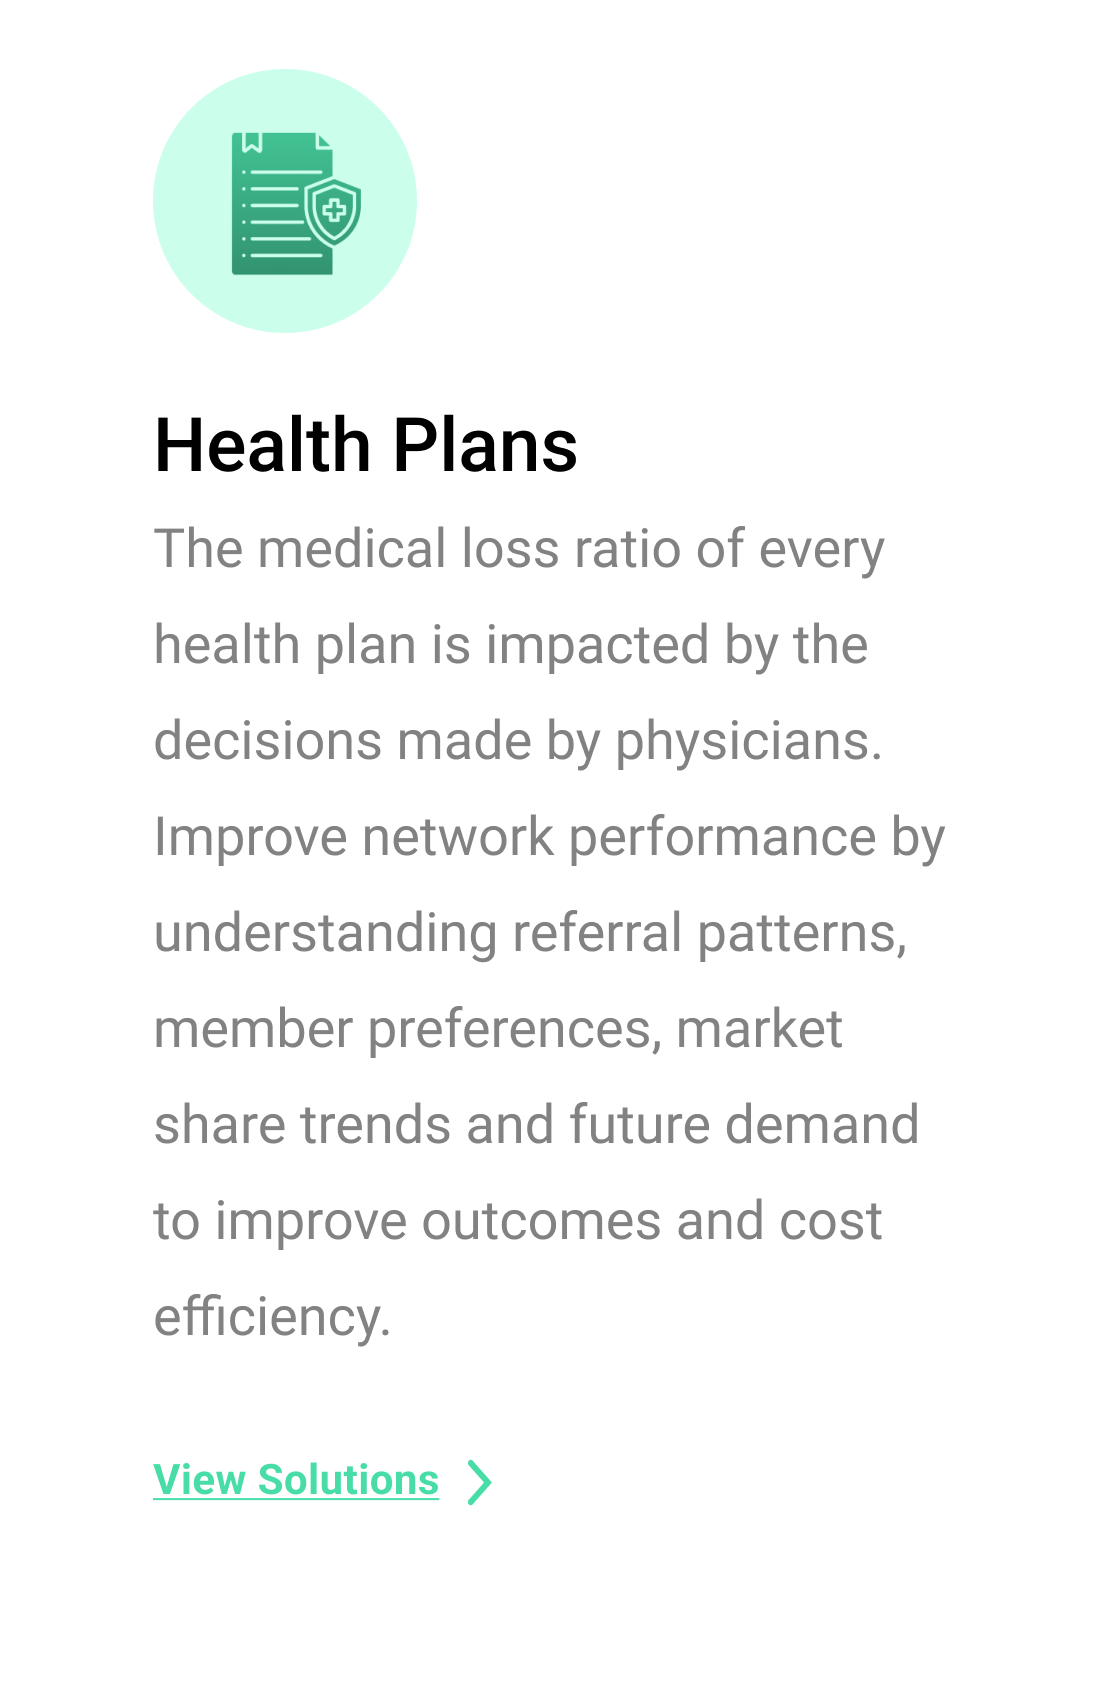 Health Plans Solutions